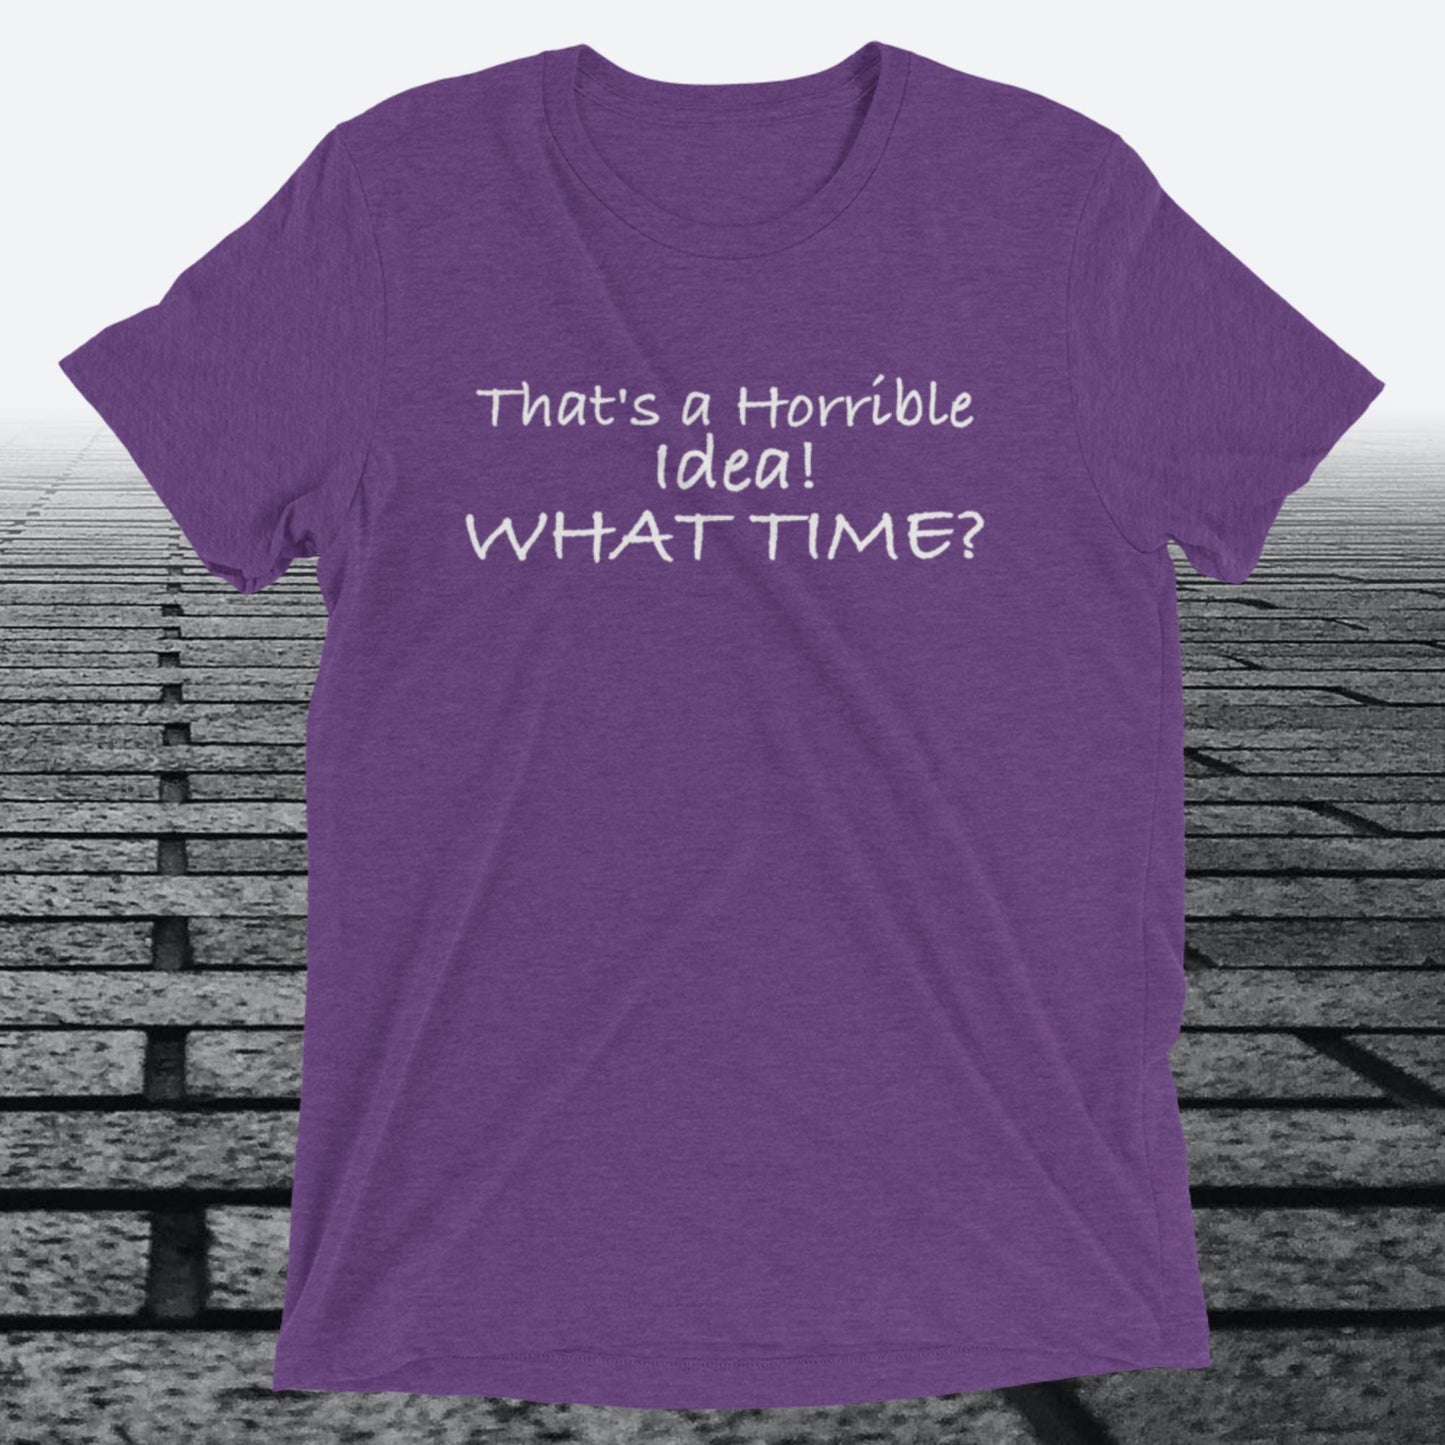 That's a Horrible Idea! What Time?, Triblend T-shirt